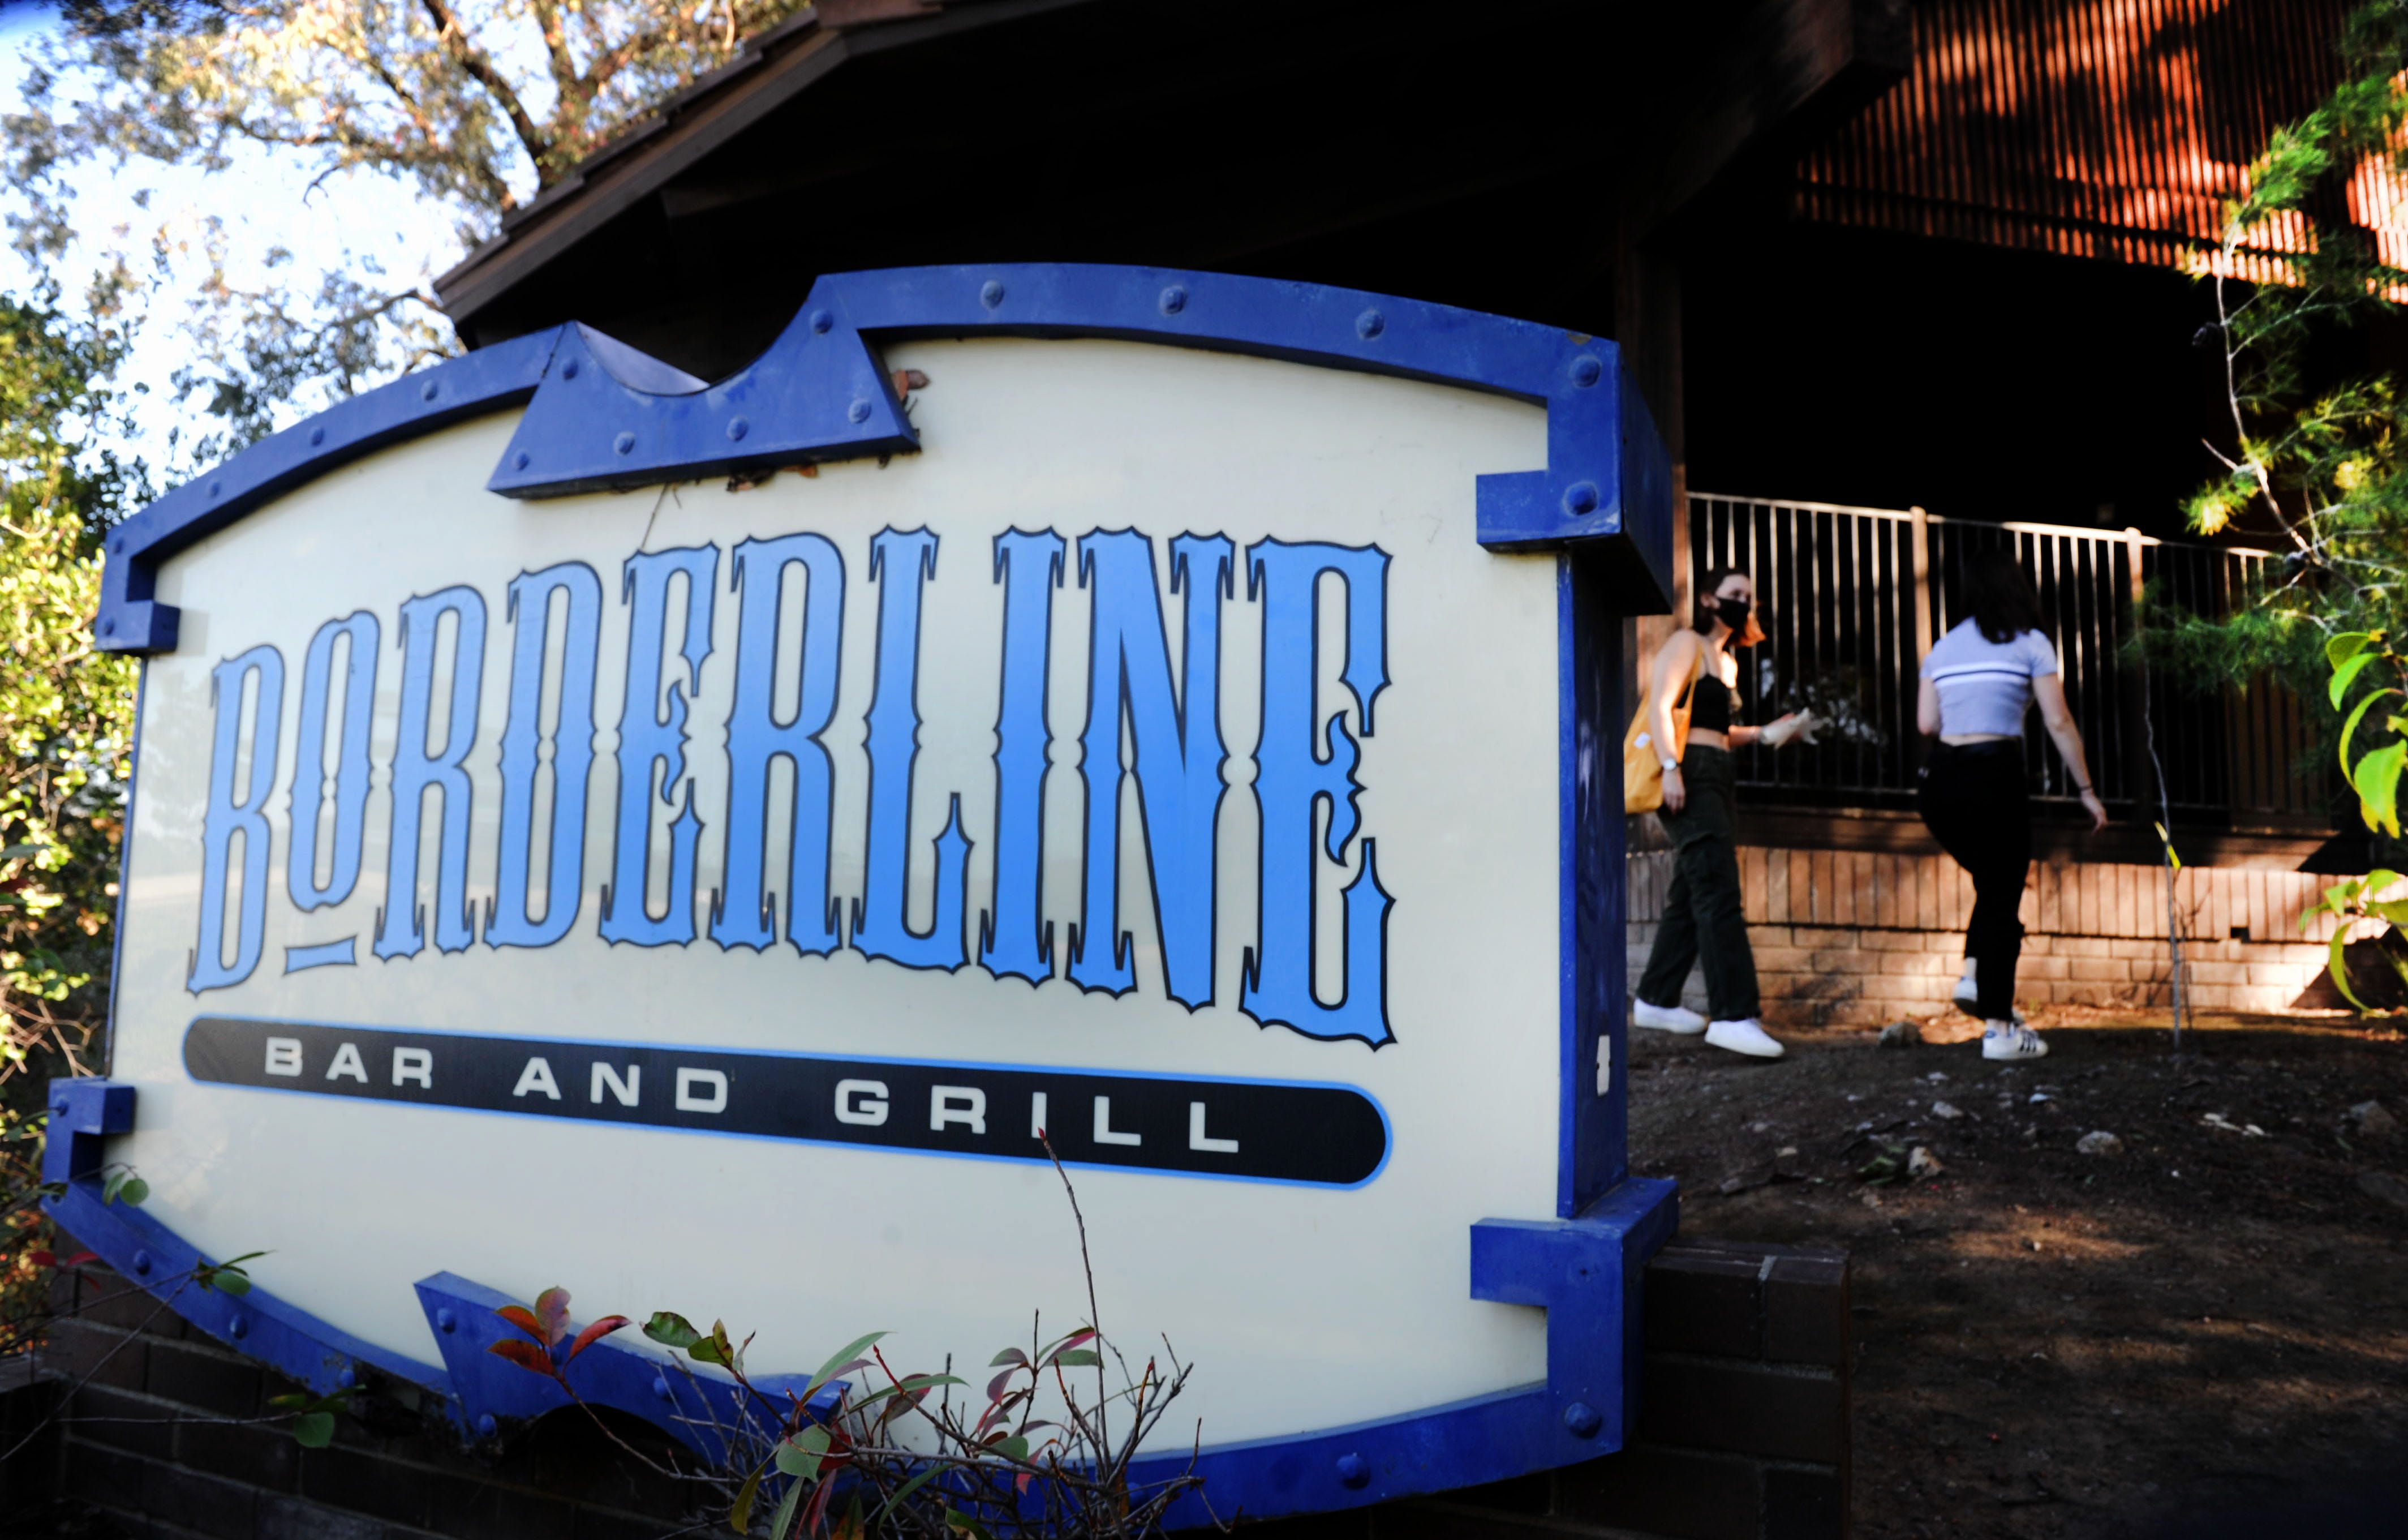 Owner of Borderline building plans to demolish it, city officials say